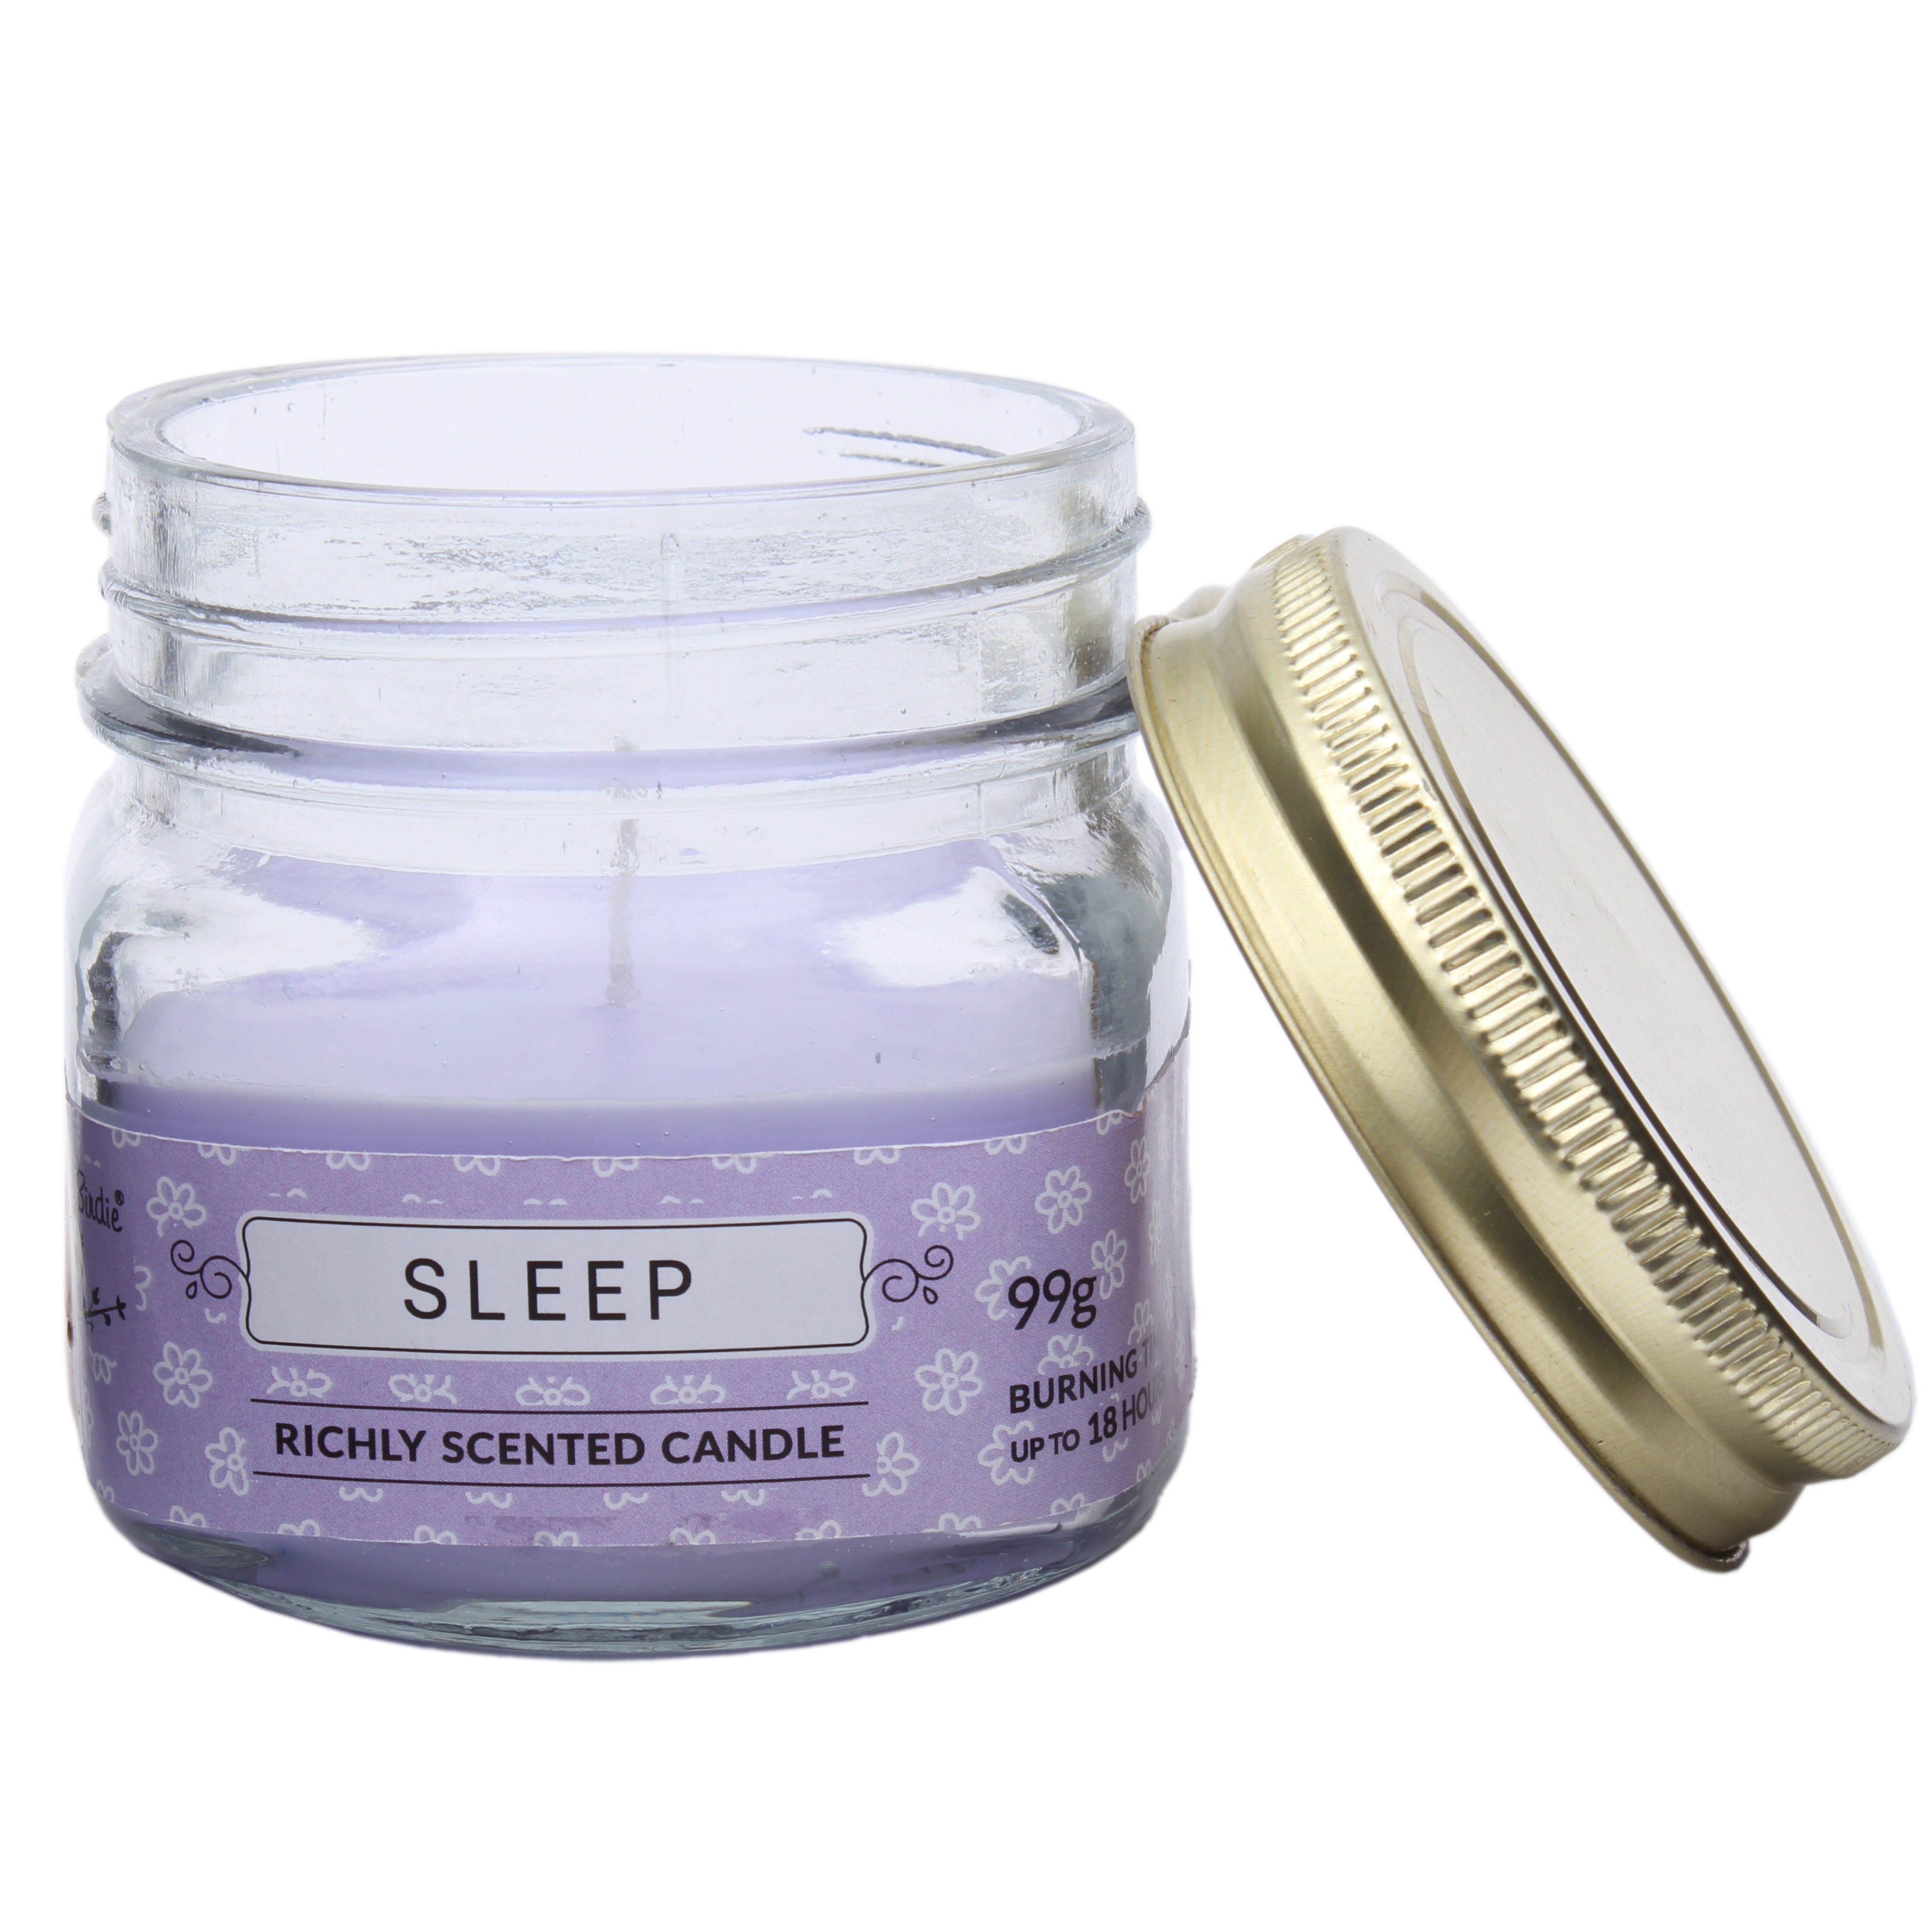 Aromatherapy Scented Jar Candle Sleep (15 To 18 Hr Burning Time) 99Grm 1Pc Lb